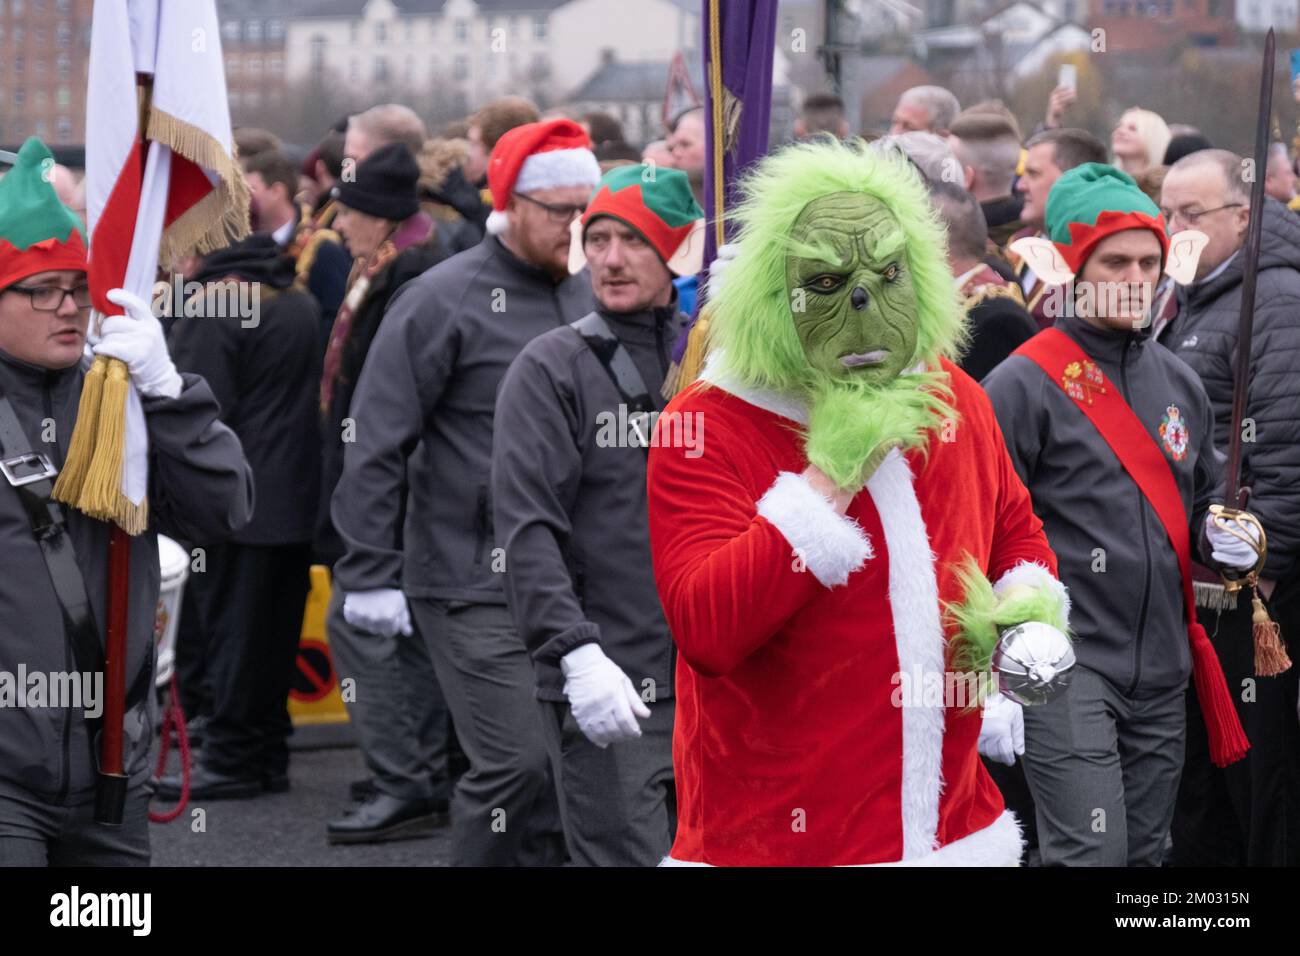 Londonderry, United Kingdom. 3 Dec, 2022. Loyalist bandsmen in festive costumes with the Apprentice Boys of Derry at Shutting of the Gates 2022. Credit: Steve Nimmons/Alamy Live News Stock Photo